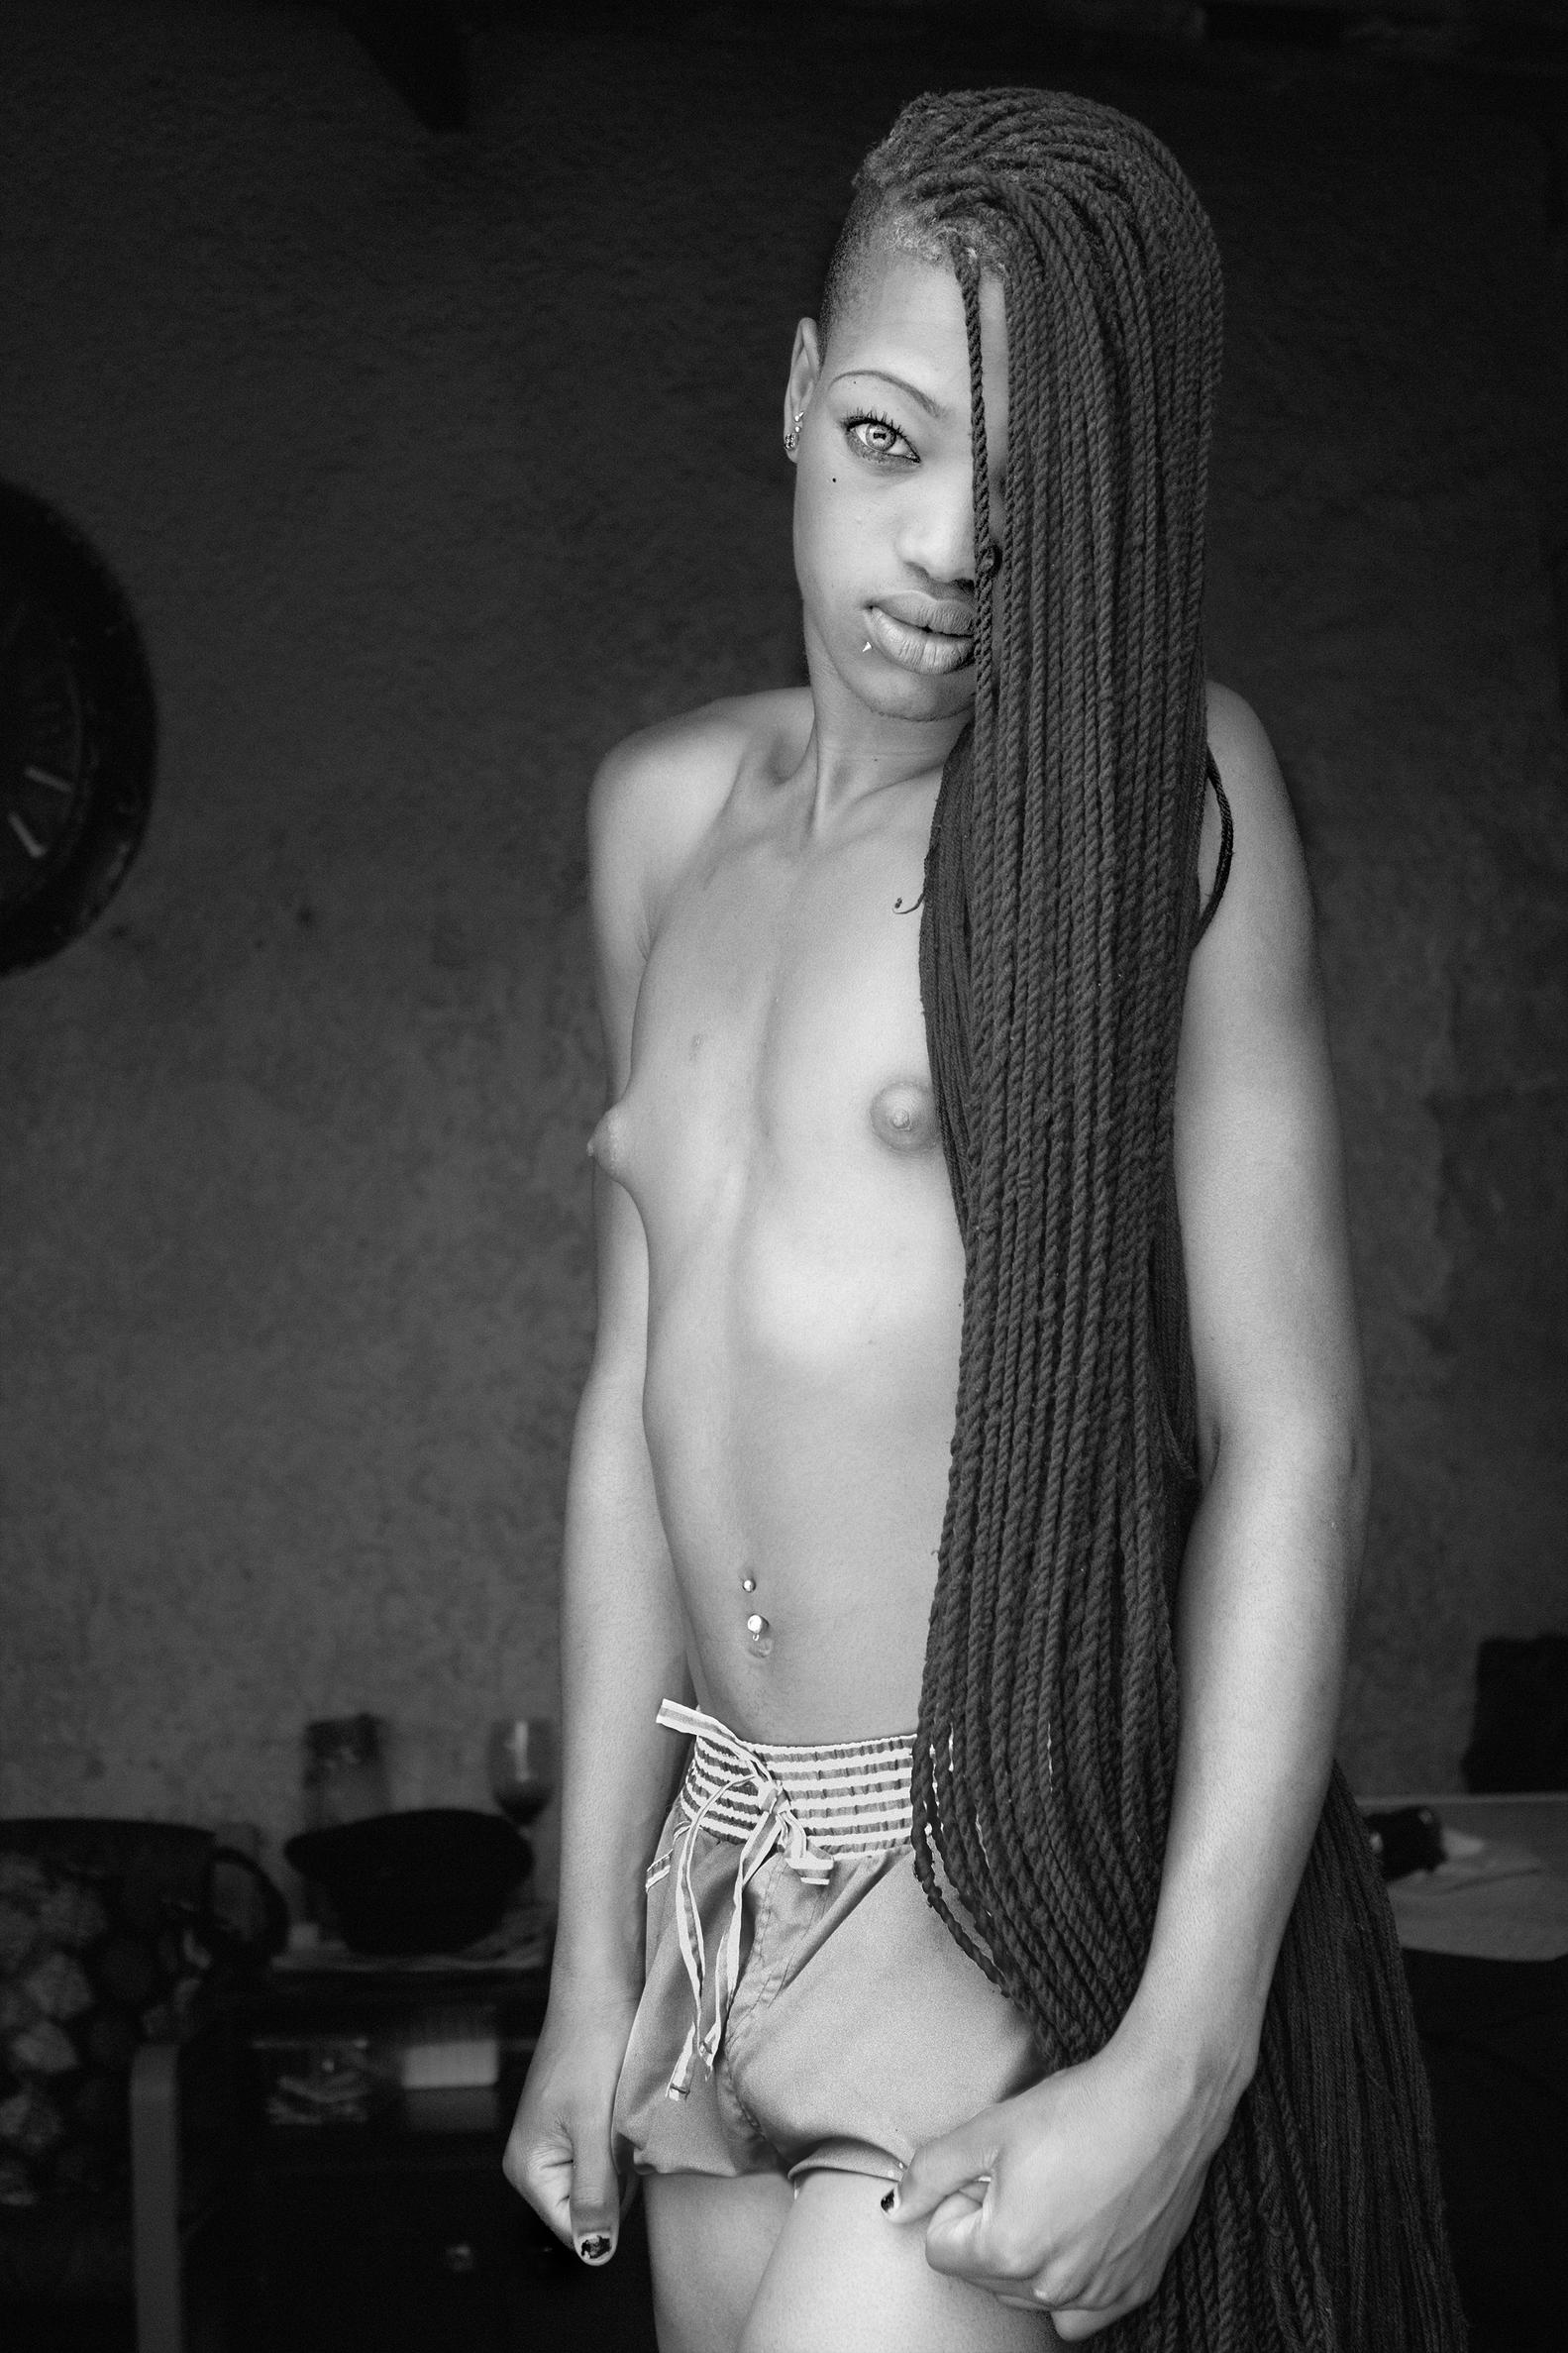 A photograph of a person with long braids, topless and in shorts. 